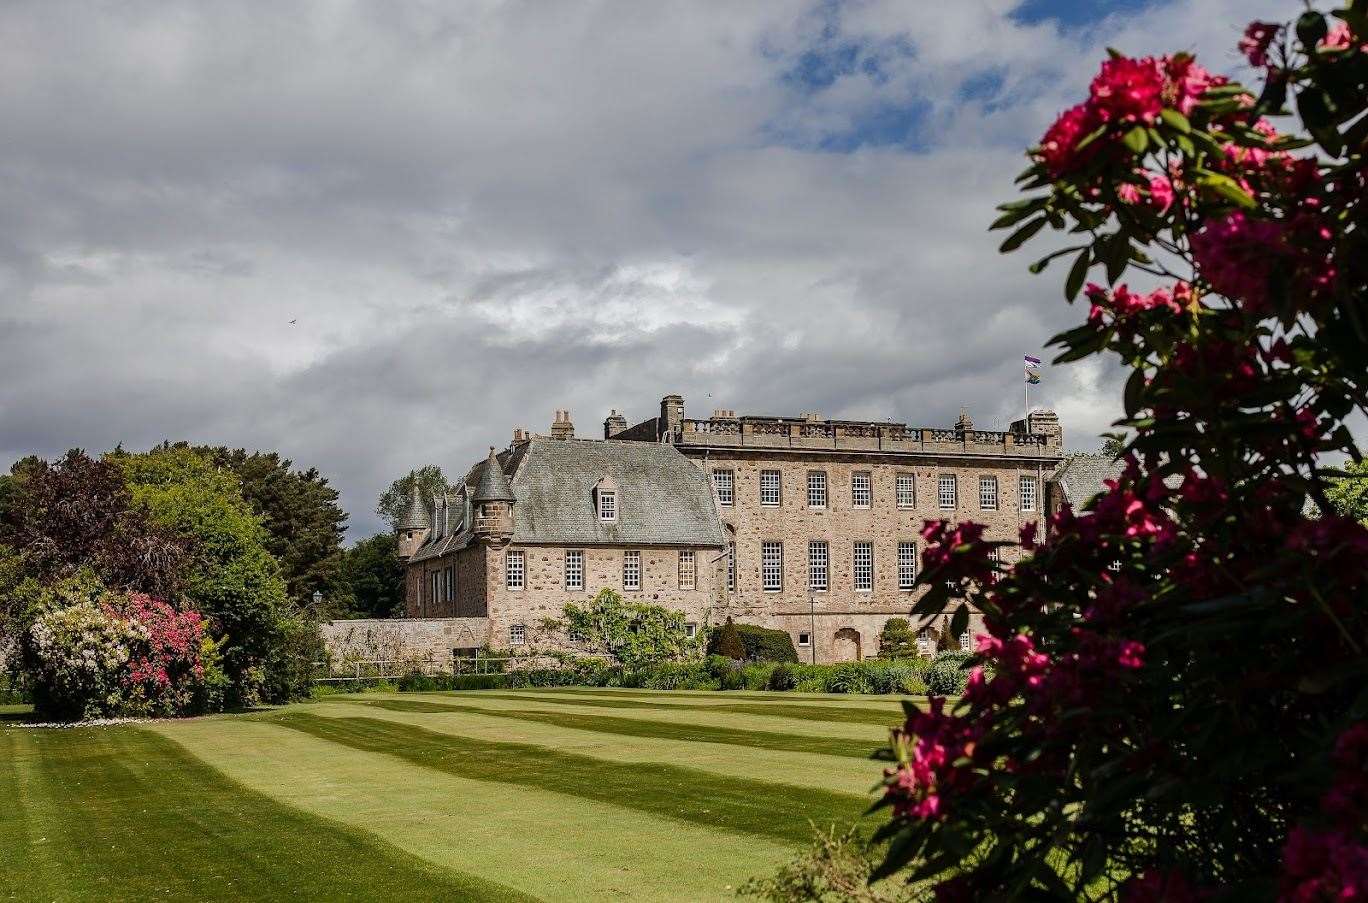 This is the only chance members of the public have to visit Gordonstoun during the year.